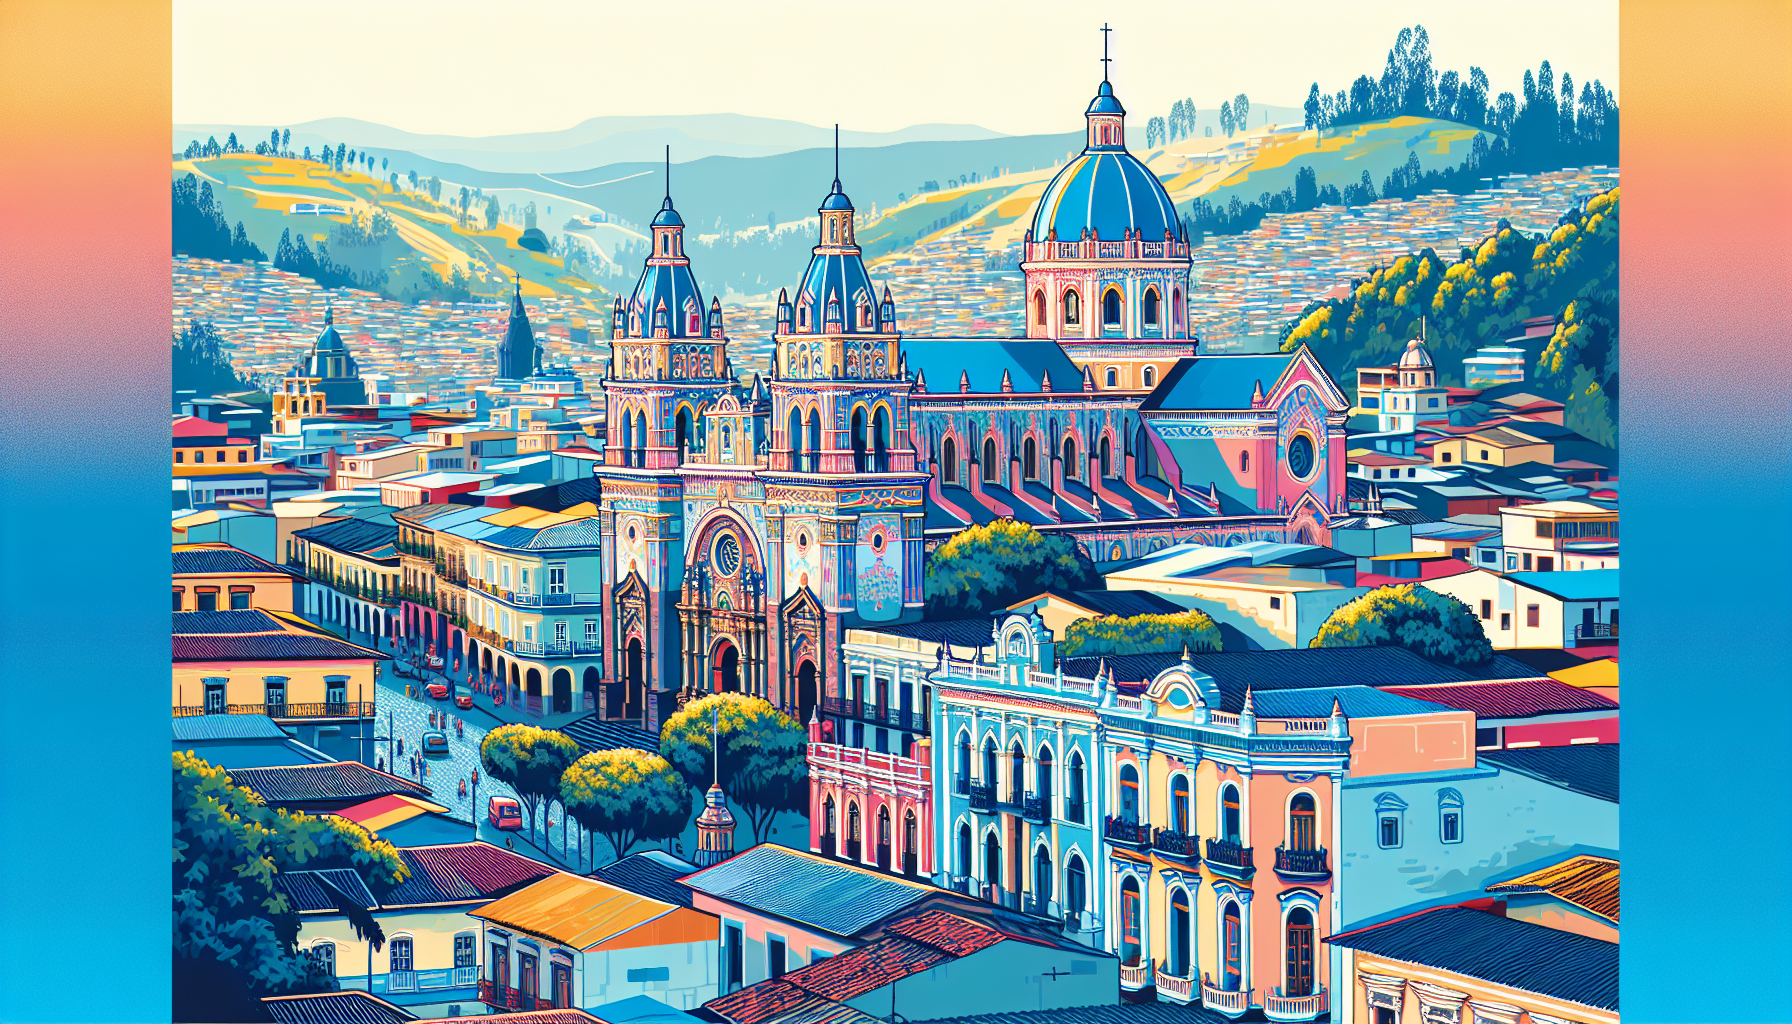 Create an image of the historic city of Cuenca, Ecuador, featuring a panoramic view with multiple churches of various architectural styles scattered across the landscape. Highlight the iconic blue dom